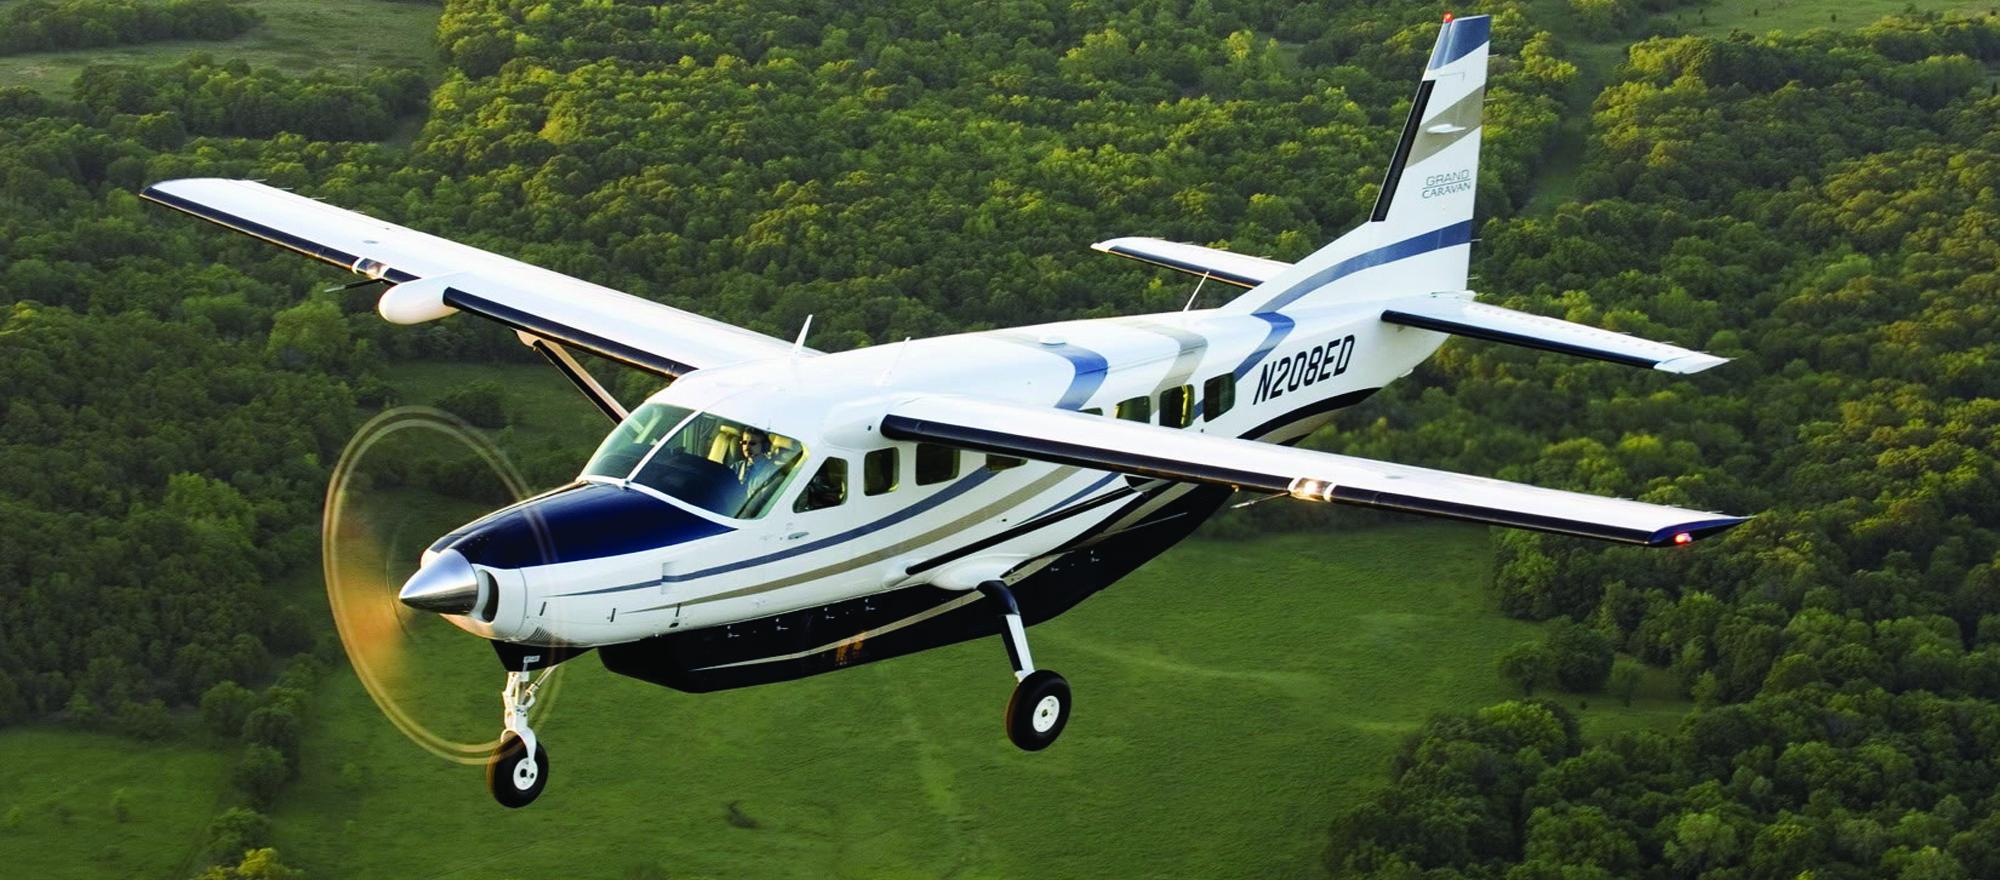 The Cessna Caravan is now being marketed under the Textron Aviation umbrella, which includes Cessna and Beechcraft products.